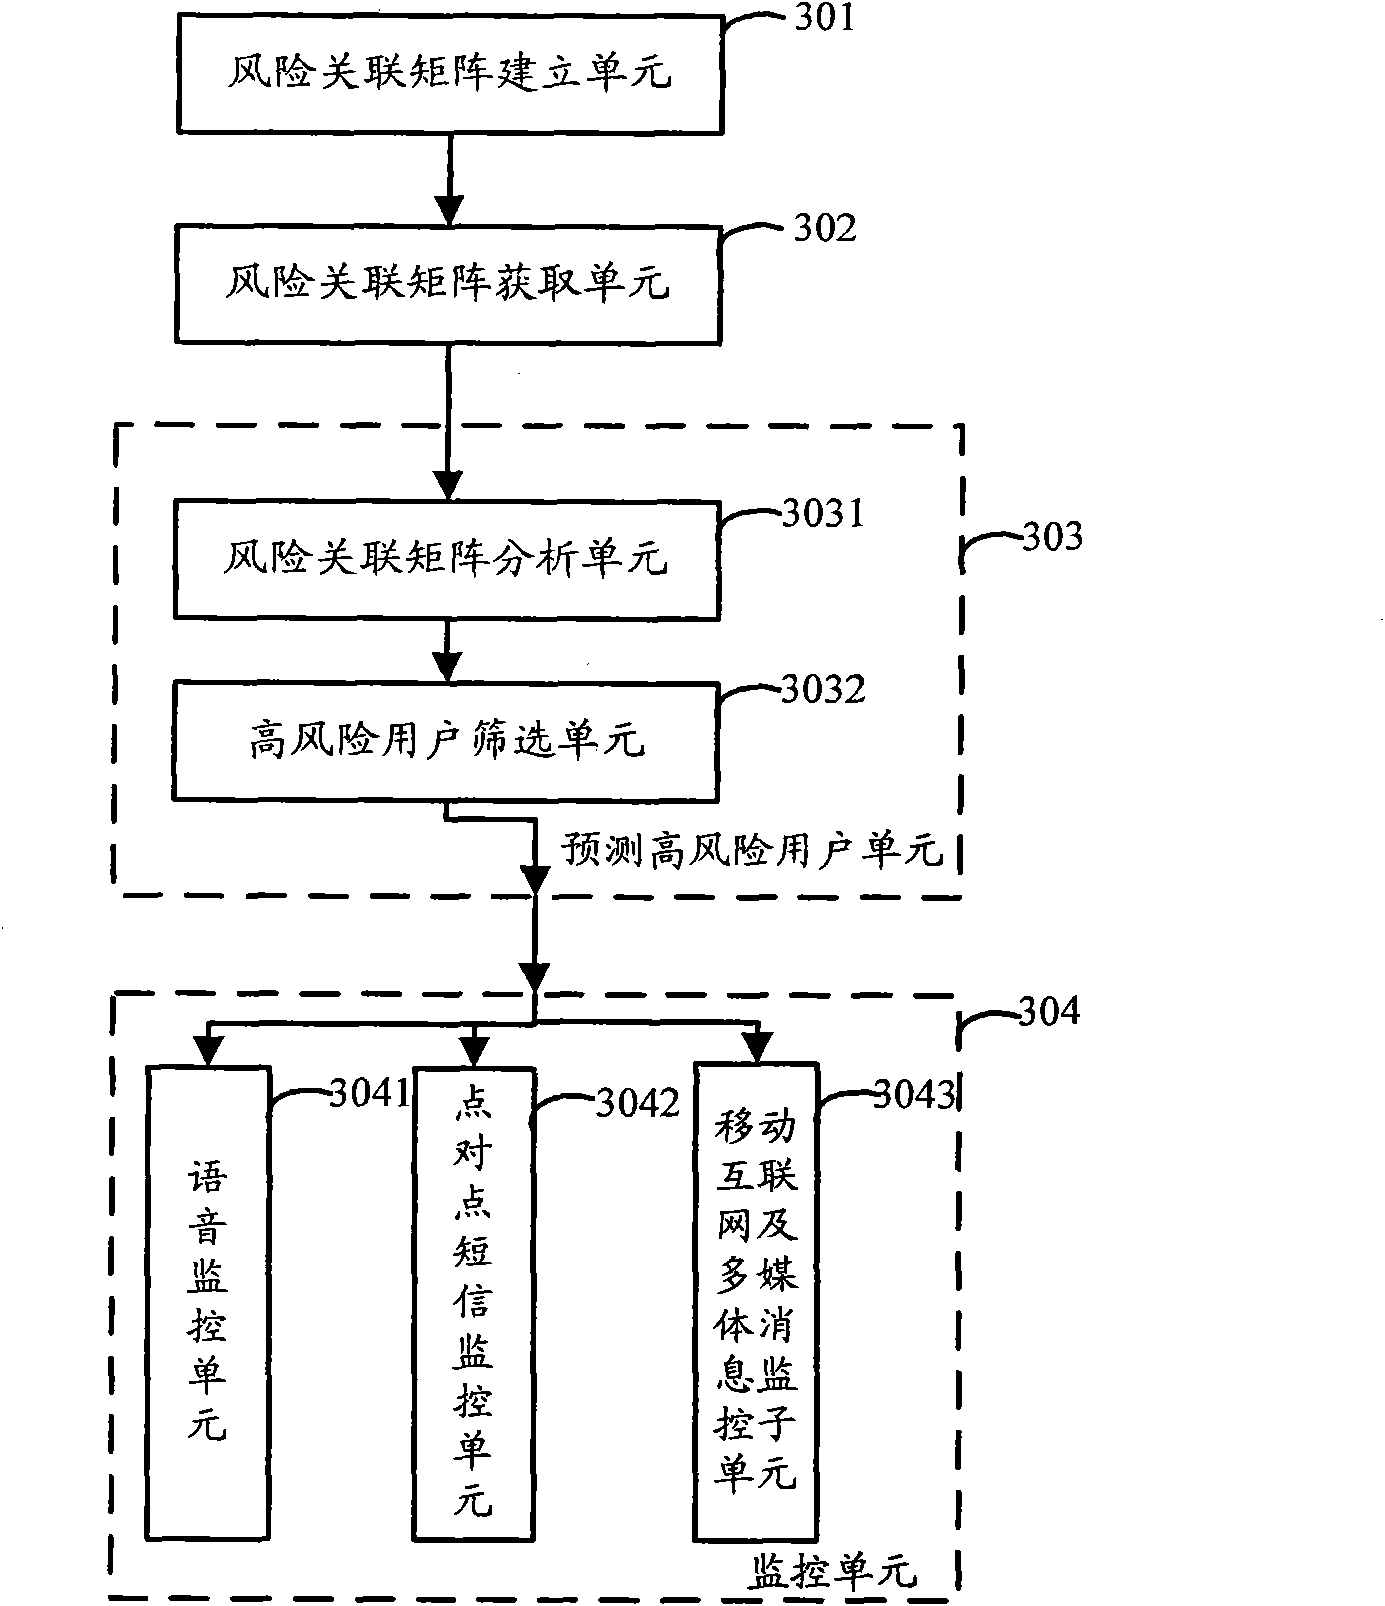 A mobile subscriber arrears monitoring system and a method for the same